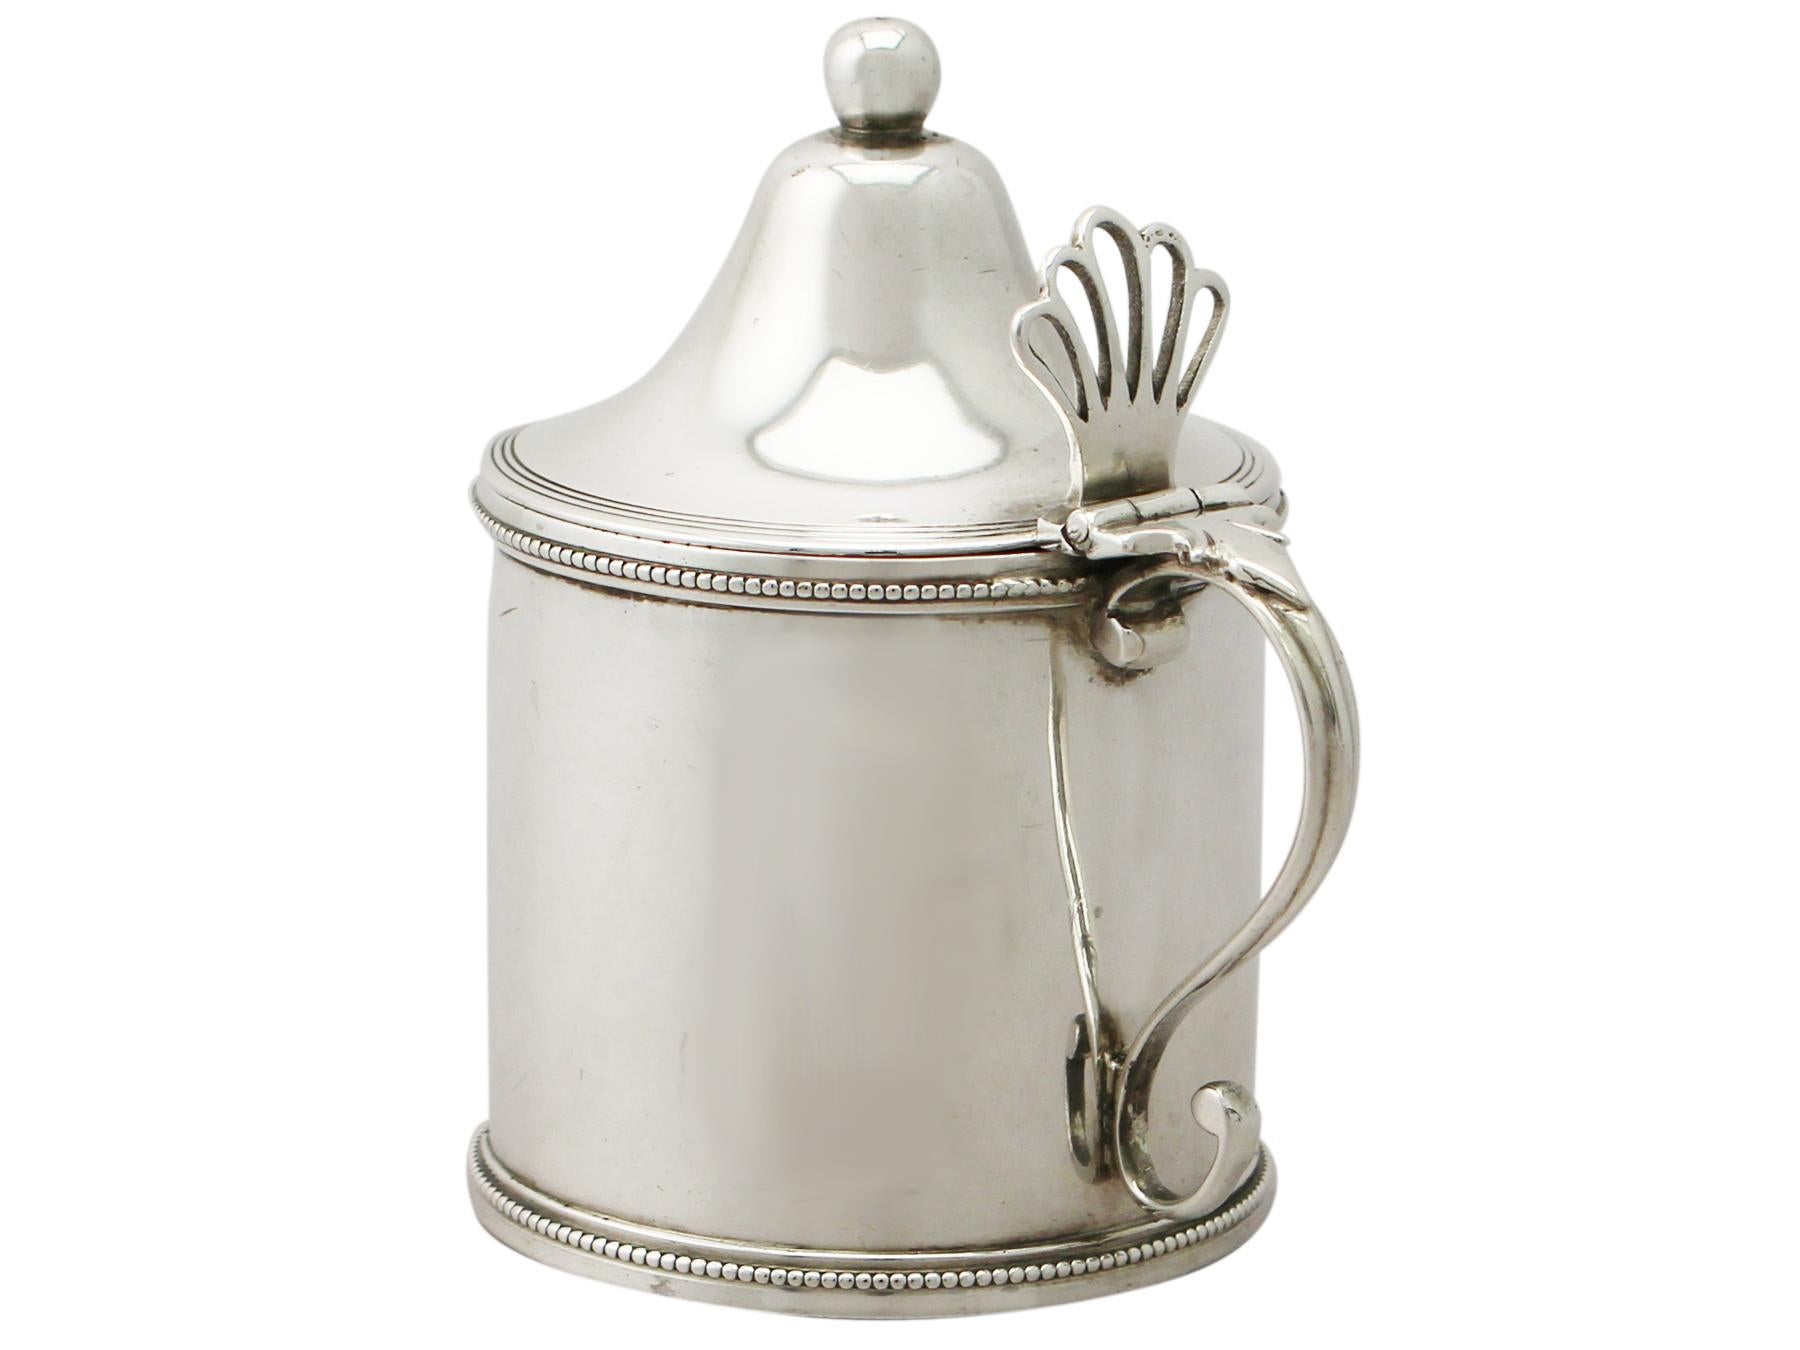 An exceptional, fine and impressive antique George III English sterling silver mustard pot made by Peter and Ann Bateman; an addition to our Georgian silver condiments collection.

This exceptional antique George III sterling silver mustard pot